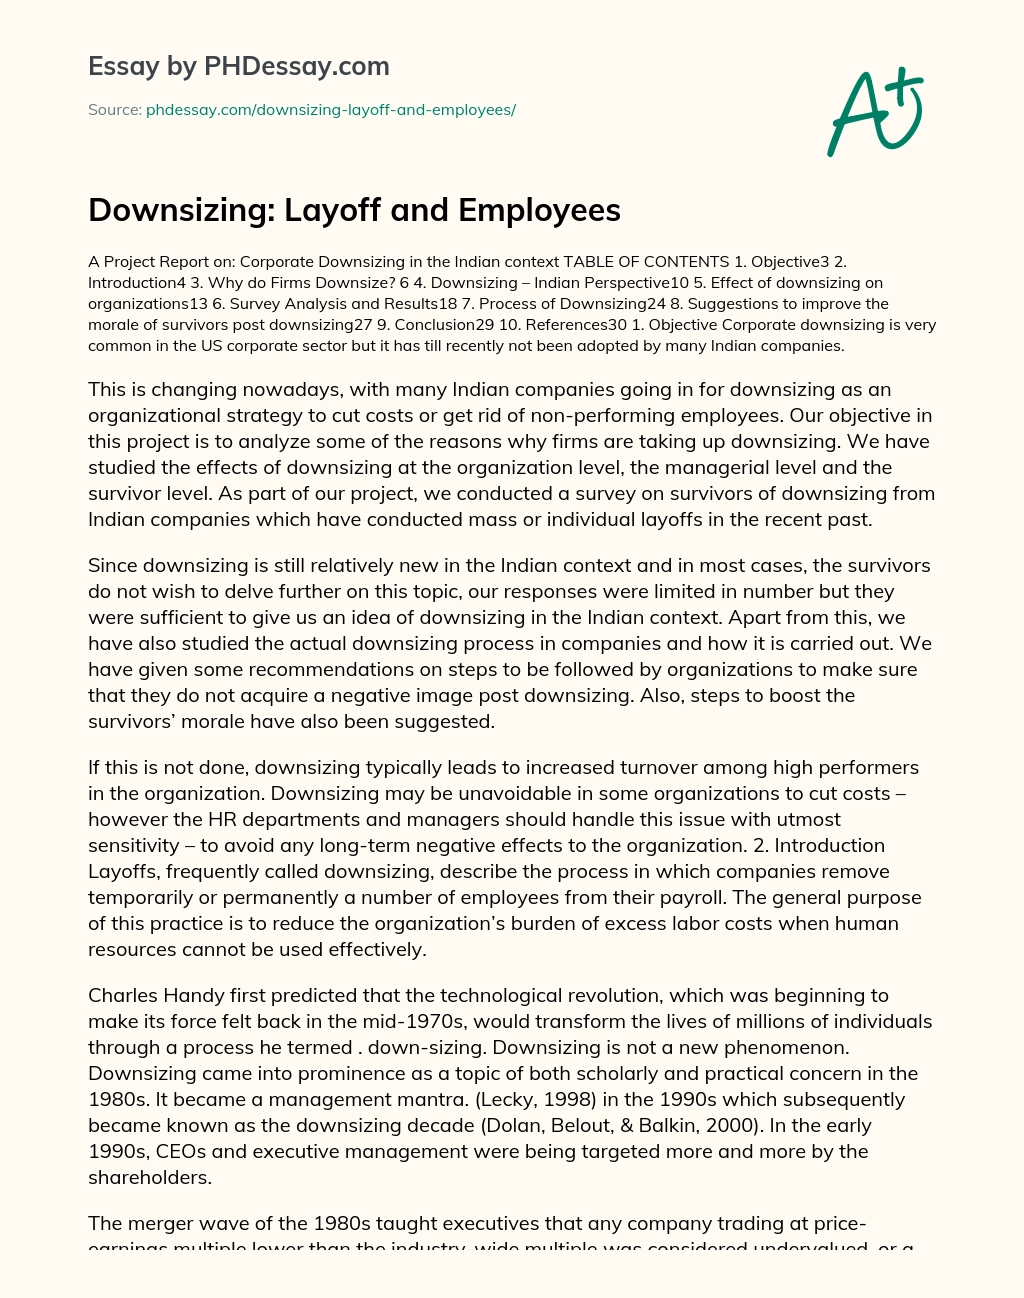 Downsizing: Layoff and Employees essay